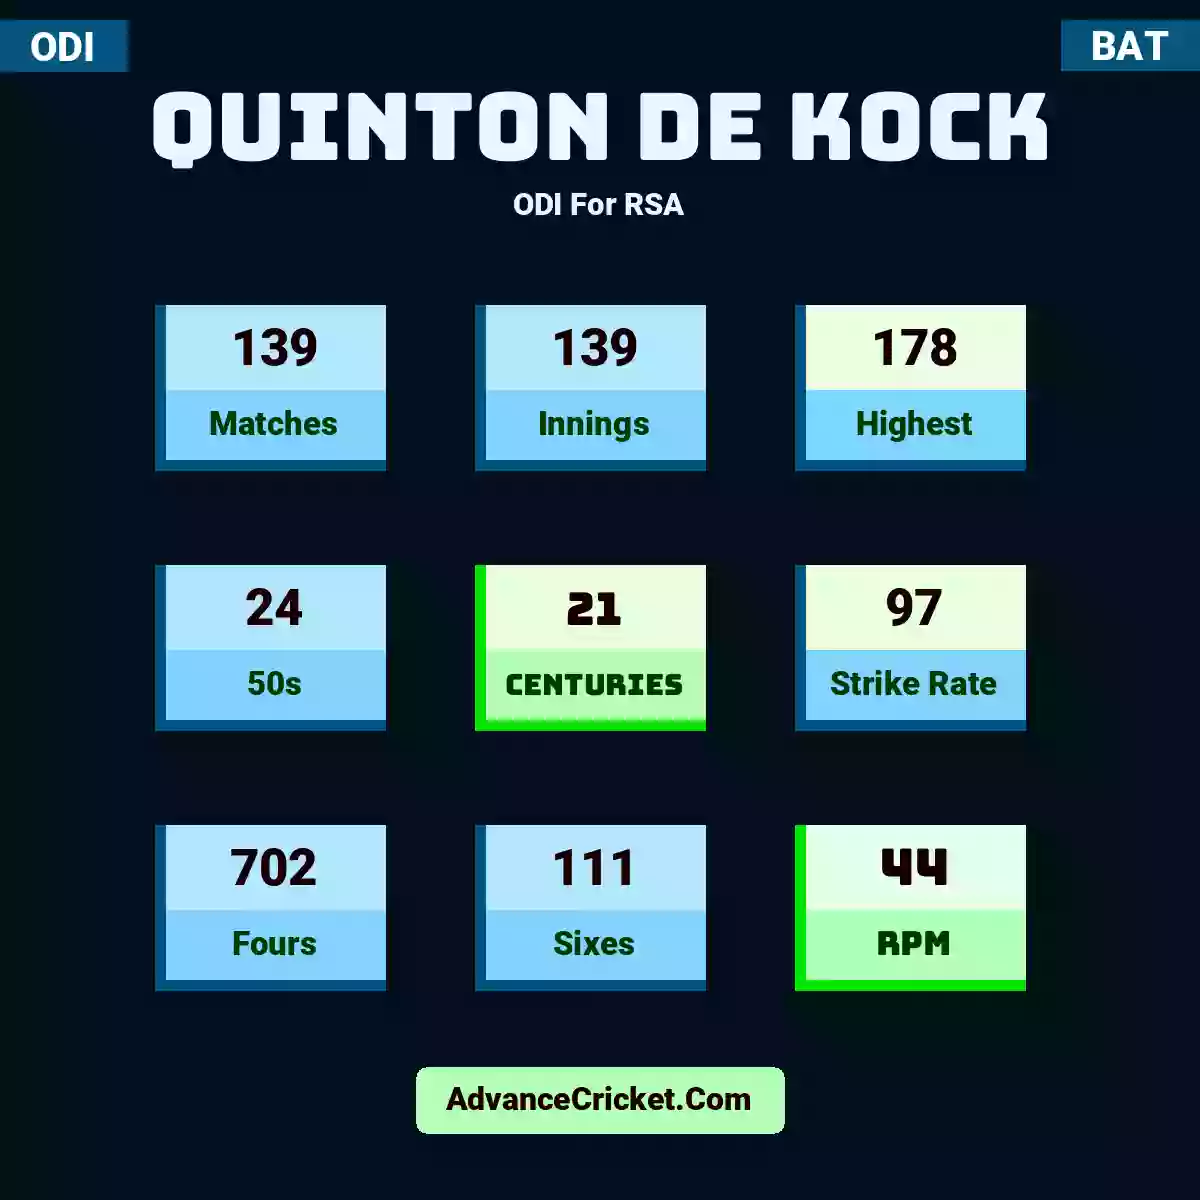 Quinton de Kock ODI  For RSA, Quinton de Kock played 139 matches, scored 178 runs as highest, 24 half-centuries, and 21 centuries, with a strike rate of 97. Q.Kock hit 702 fours and 111 sixes, with an RPM of 44.